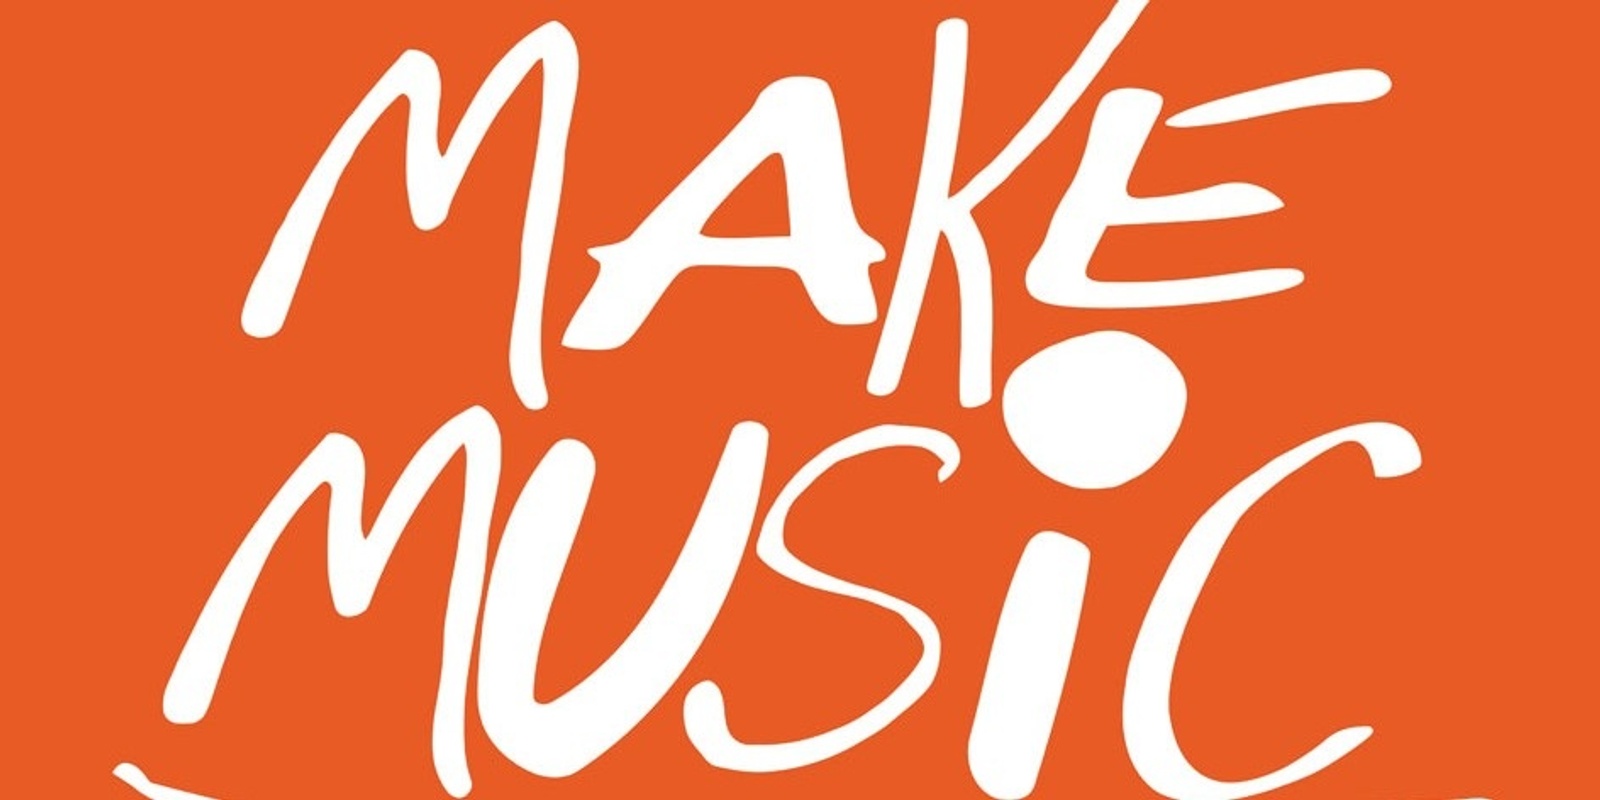 Banner image for Make Music Day combined Schools Concert 